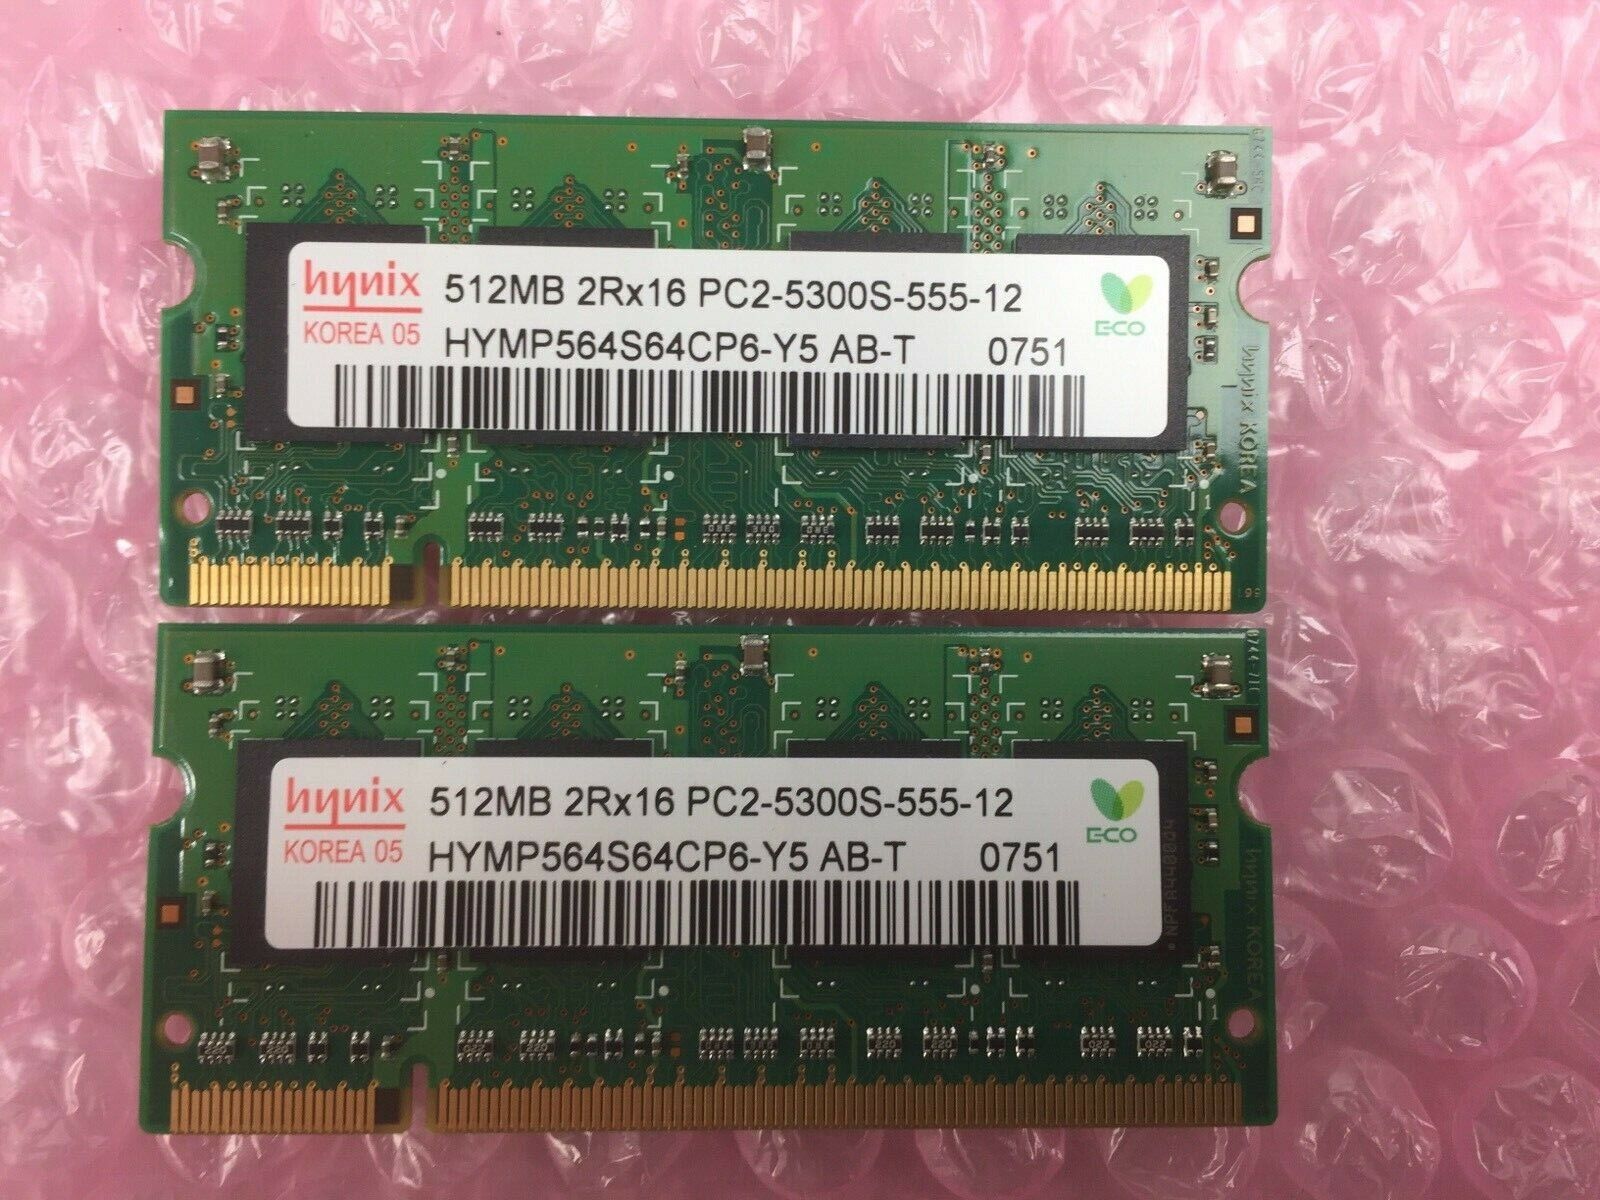 Lot of 2 Hynix 512MB 2Rx16 PC2-5300S-555-12 HYMP564S64CP6-Y5 AB-T 0751